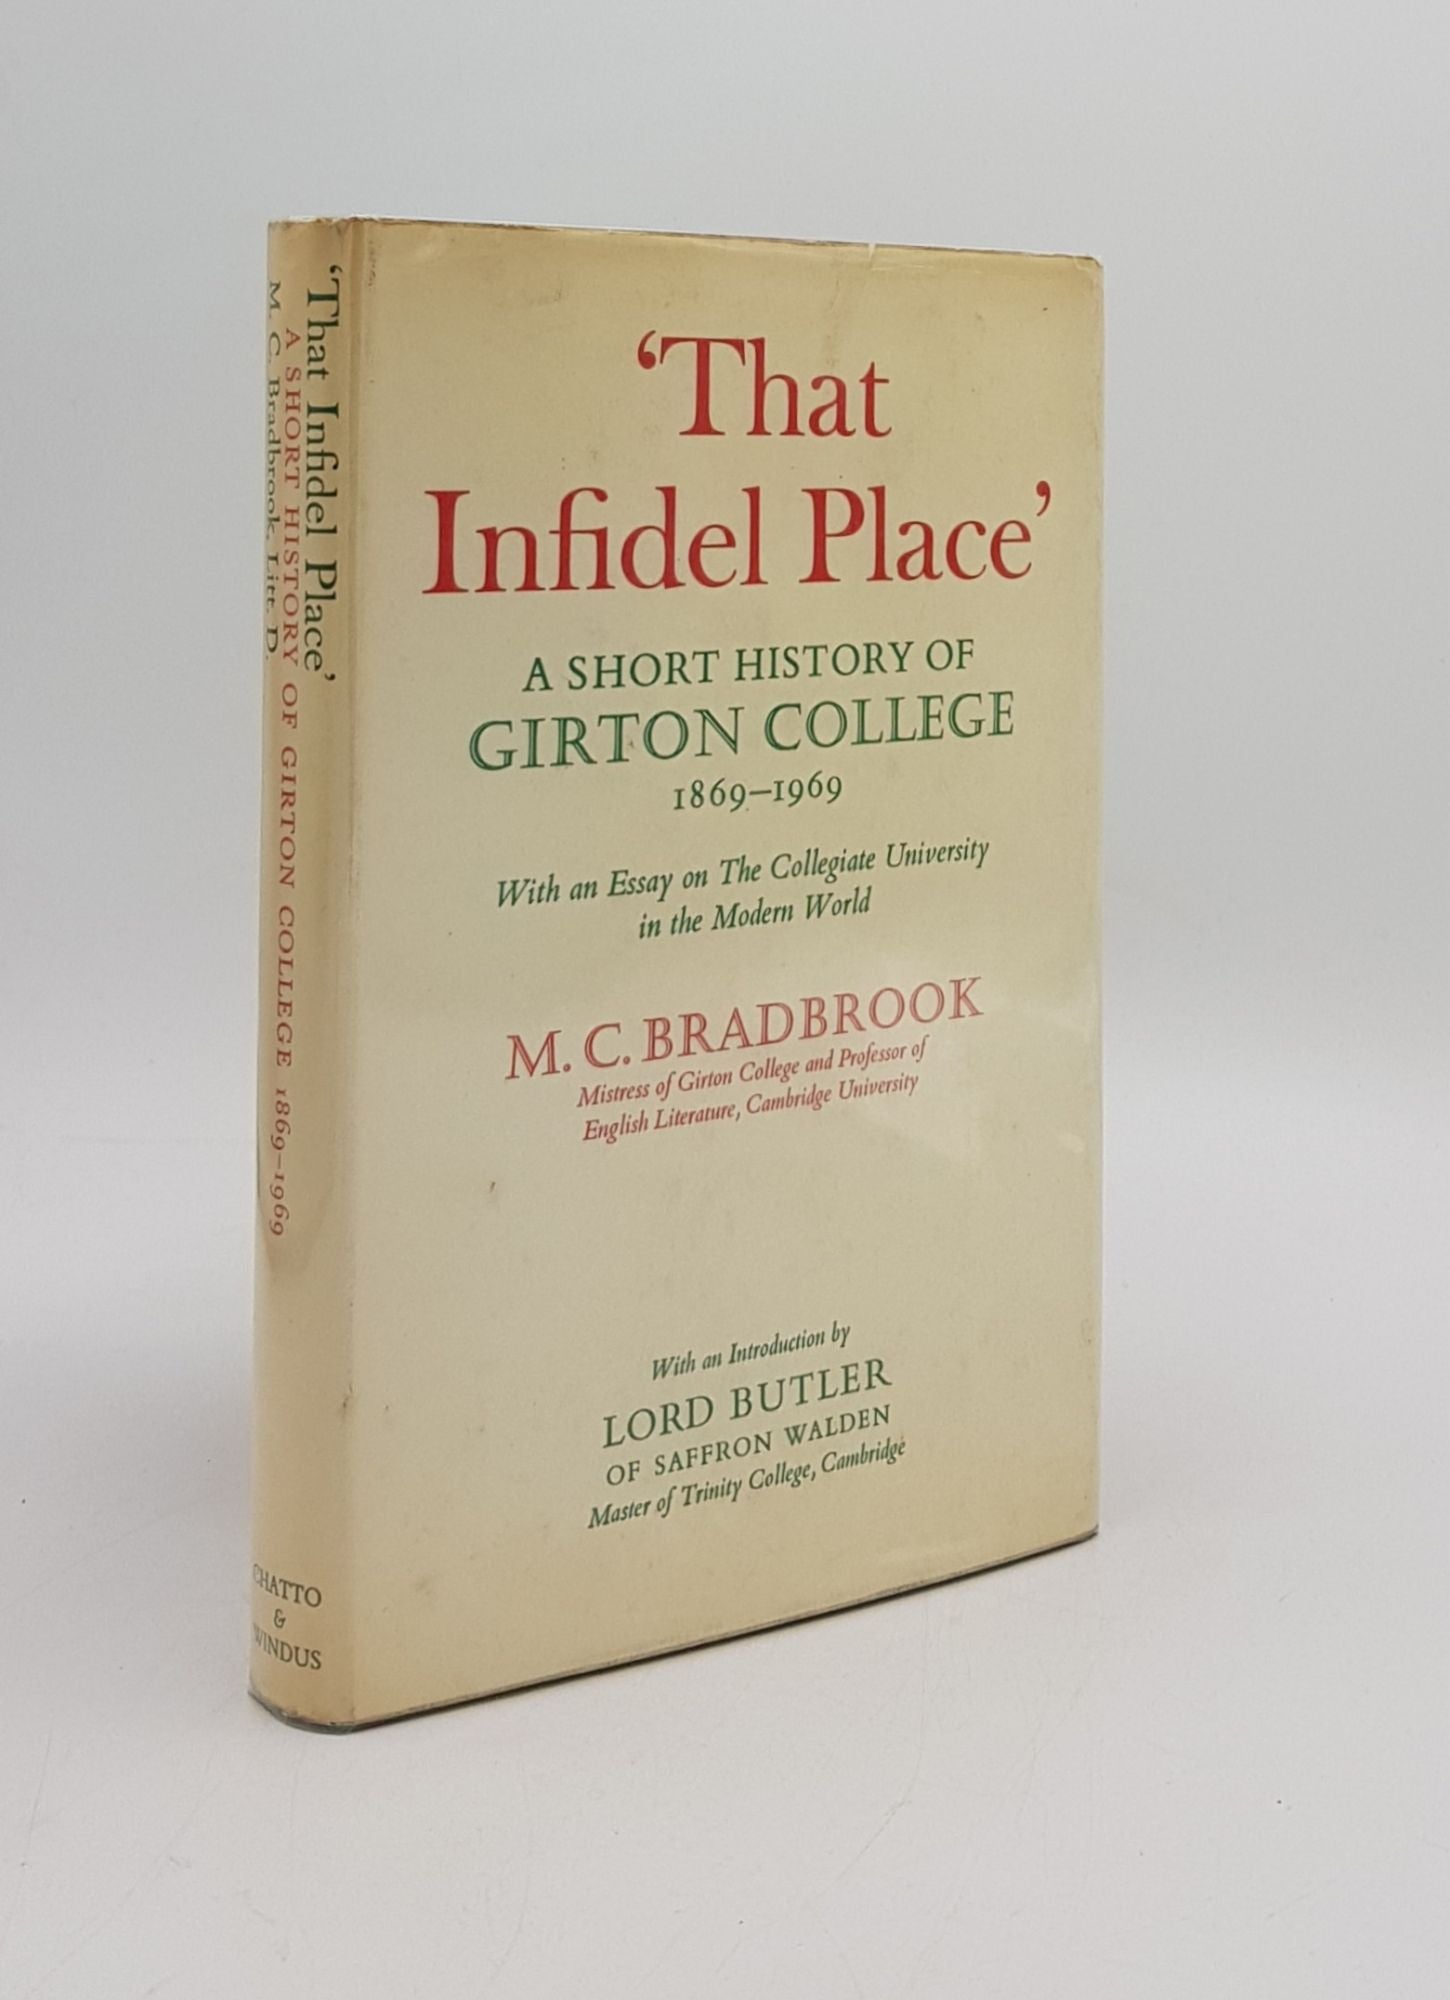 BRADBROOK M.C. - That Infidel Place a Short History of Girton College 1869-1969 with an Essay on the Collegiate University in the Modern World